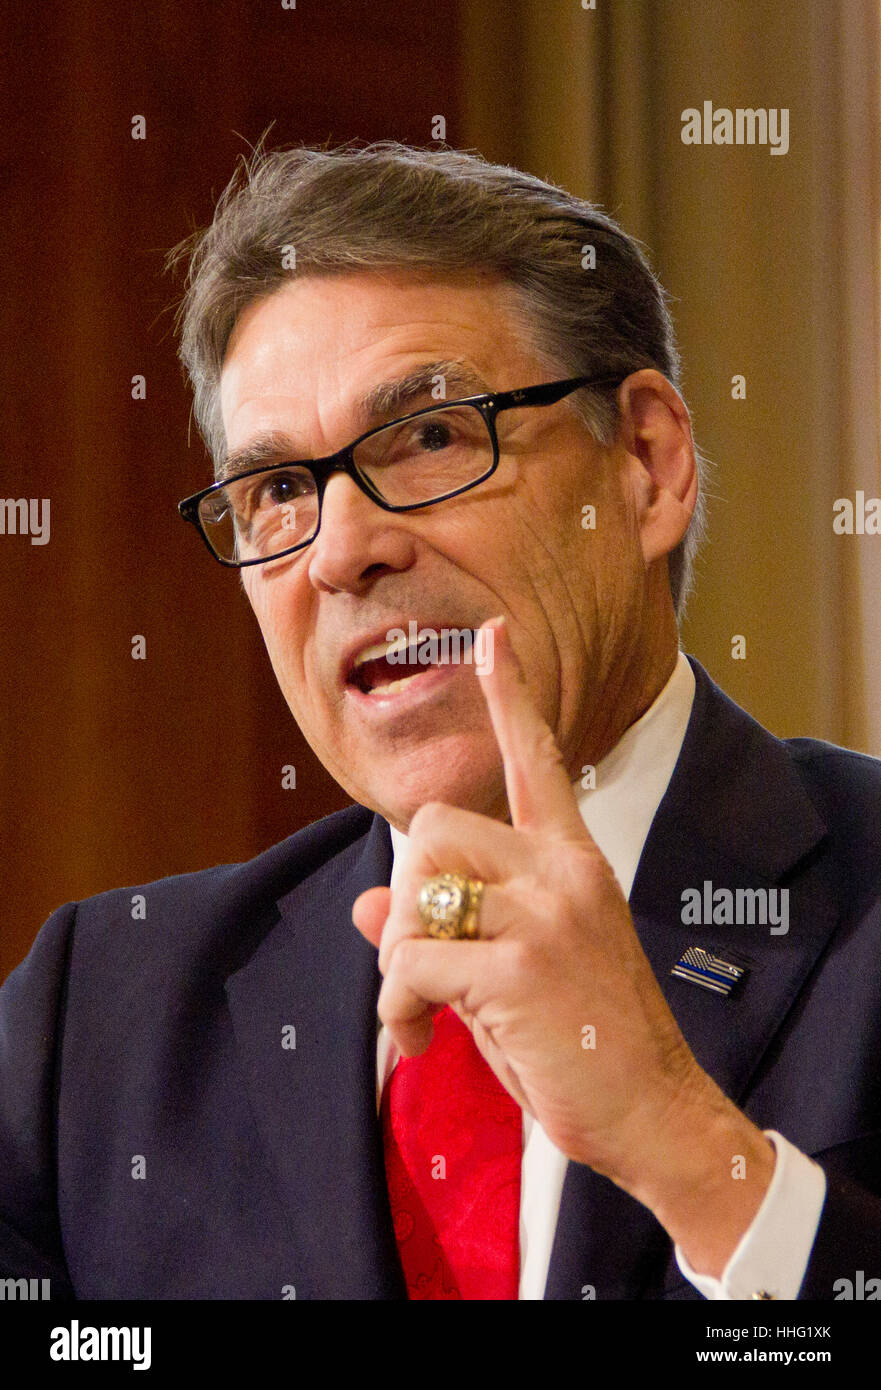 Washington, USA. 19th Jan, 2017. Former Texas Governor Rick Perry, President-elect Donald Trump's choice as Secretary of Energy, testifies during his confirmation hearing before the Senate Committee on Energy and Natural Resources on Capitol Hill January 19, 2017 in Washington, DC. Perry is expected to face questions about his connections to the oil and gas industry. Credit: PixelPro/Alamy Live News Stock Photo